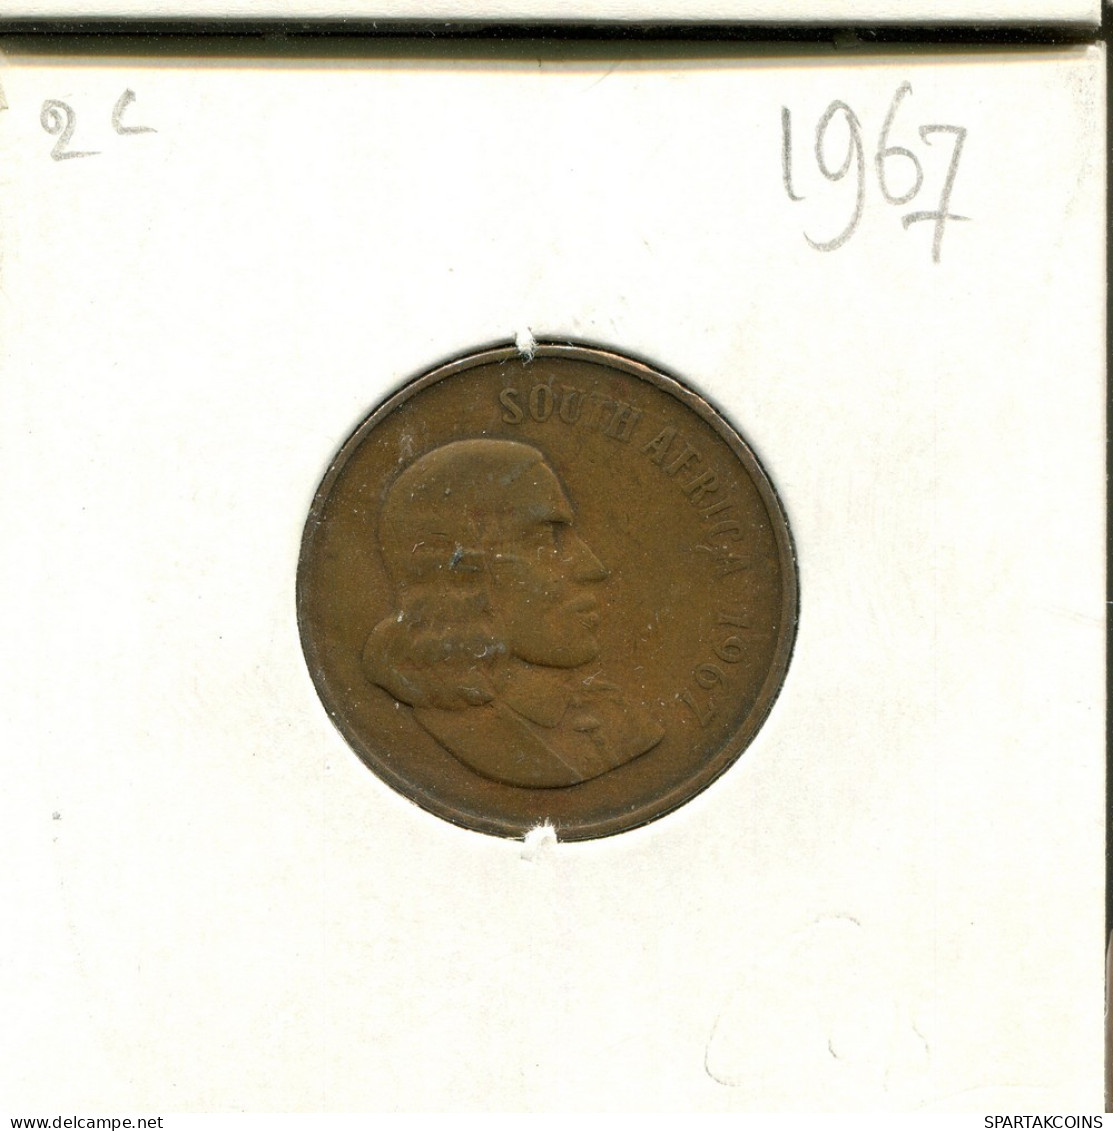 2 CENTS 1967 AFRIQUE DU SUD SOUTH AFRICA Pièce #AT079.F.A - South Africa